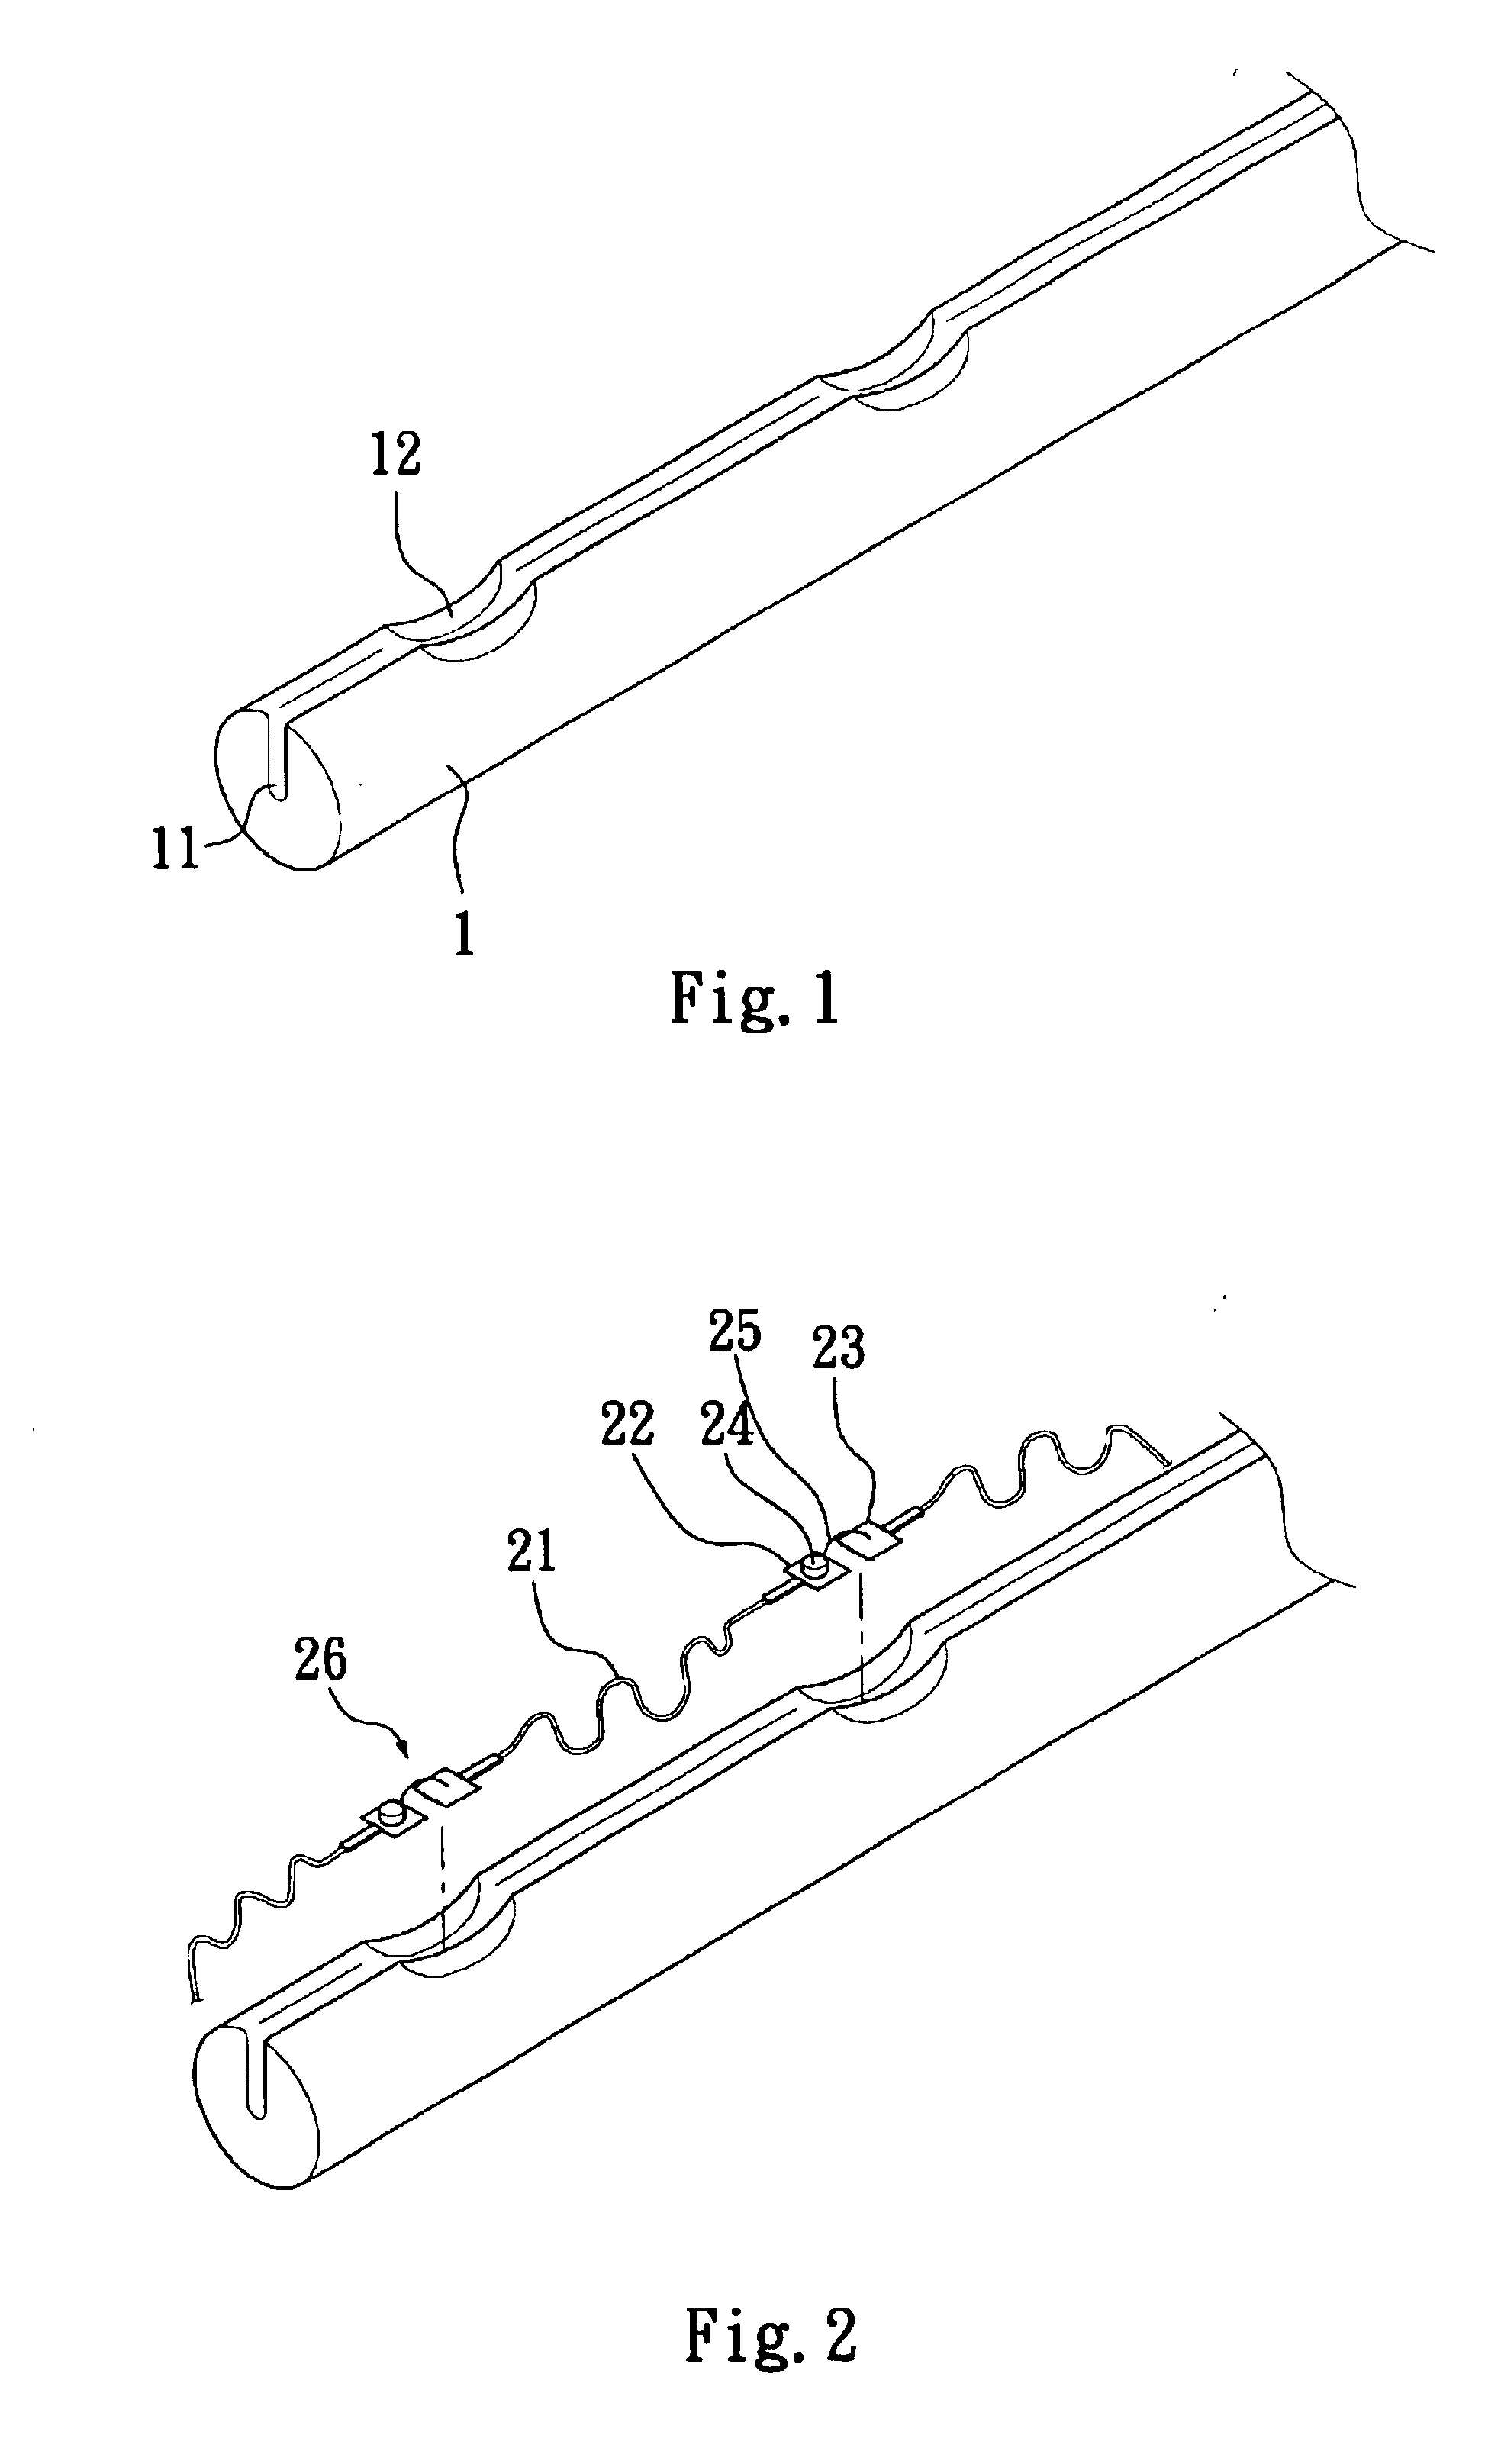 Method of producing an LED hose light